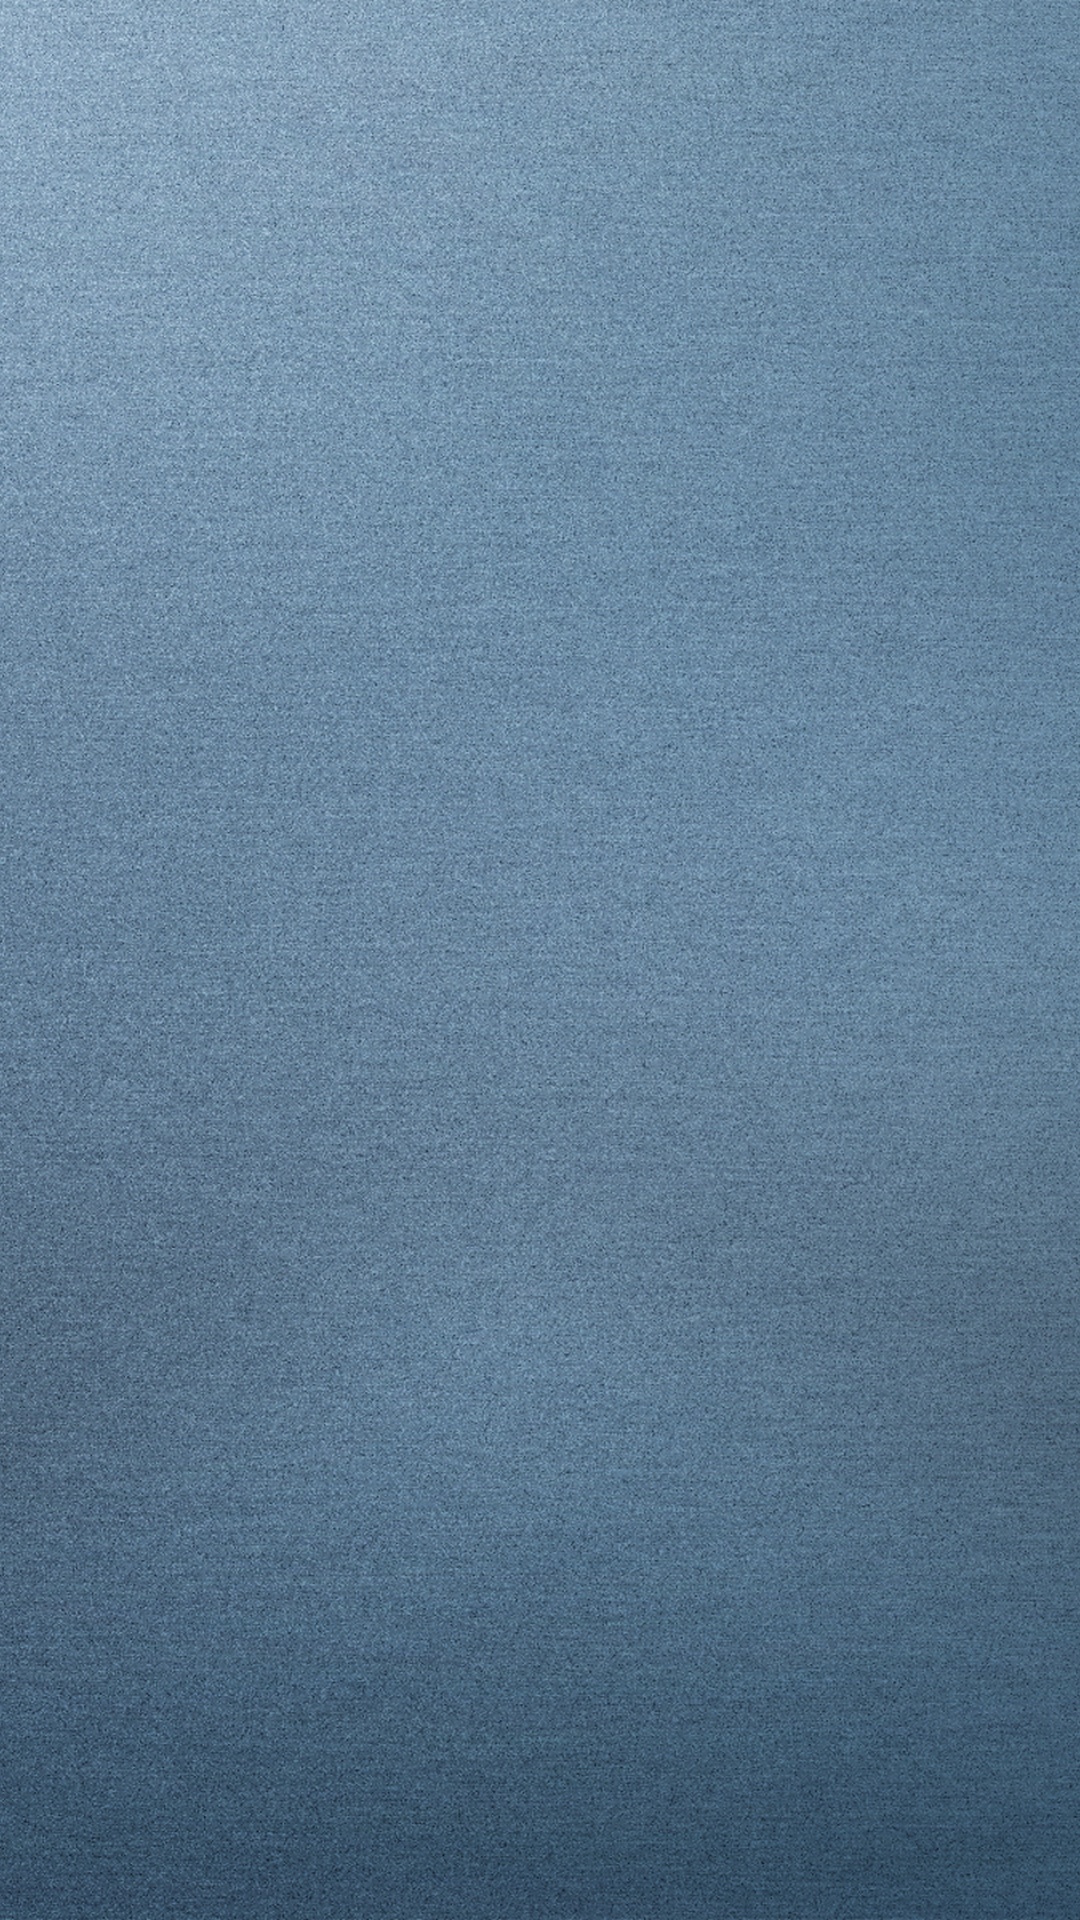 wallpaper for galaxy s4 with blue wool texture